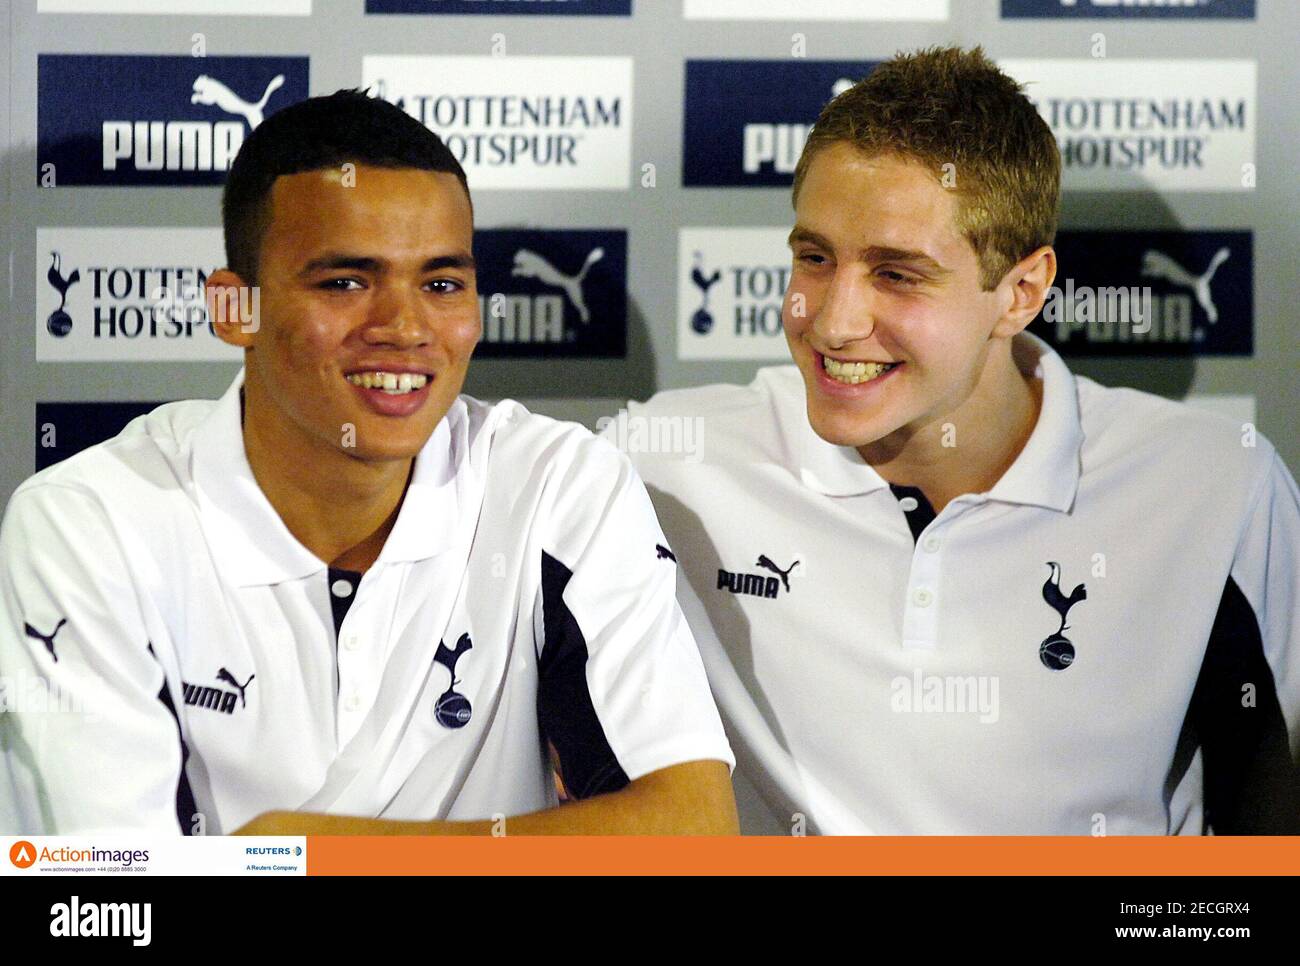 Football - Tottenham Hotspur - PUMA Press Conference - White Hart Lane -  10/2/06 Tottenham's Jermaine Jenas with Michael Dawson during the press  conference Mandatory Credit: Action Images / Tony O'Brien Livepic Stock  Photo - Alamy